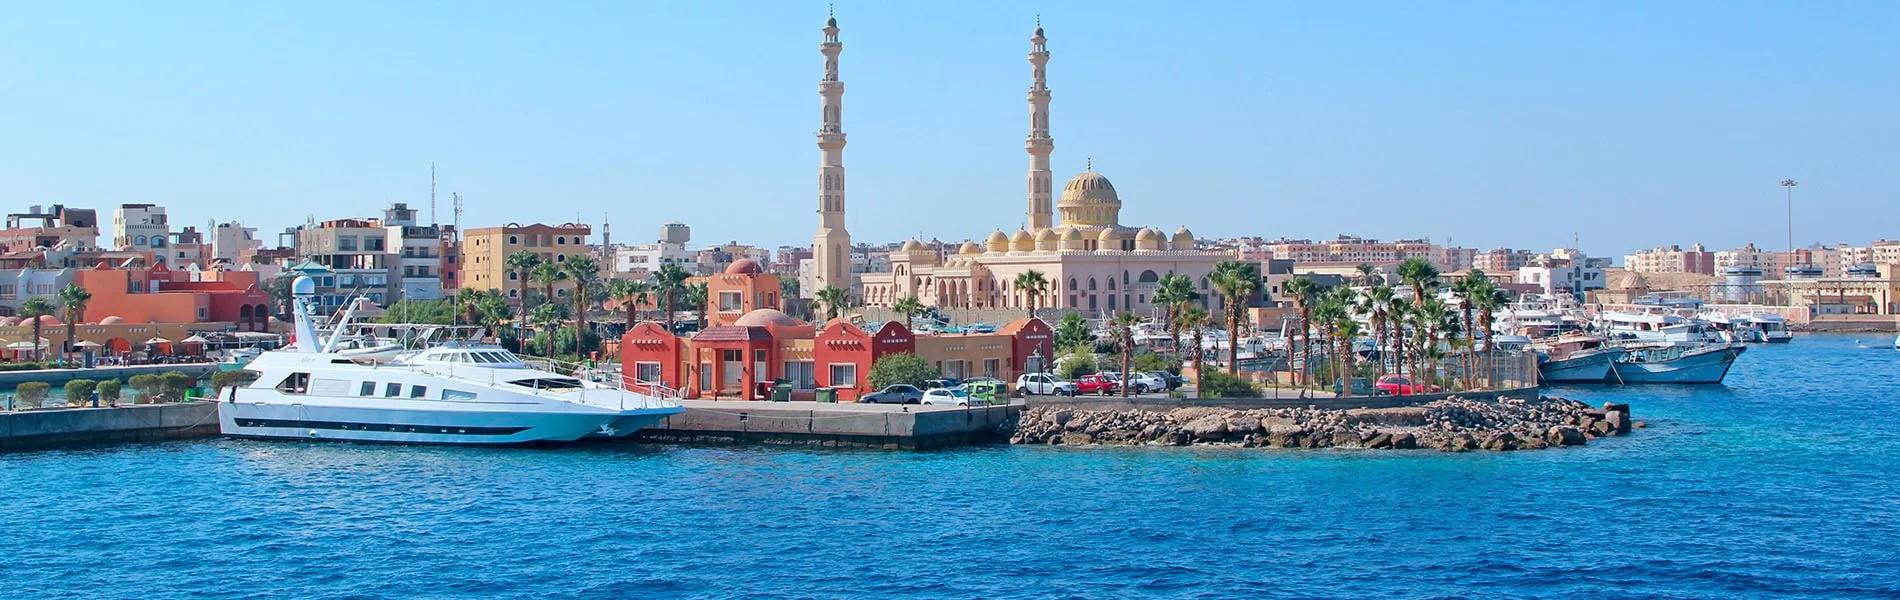 Flights from Luxor to hurghada